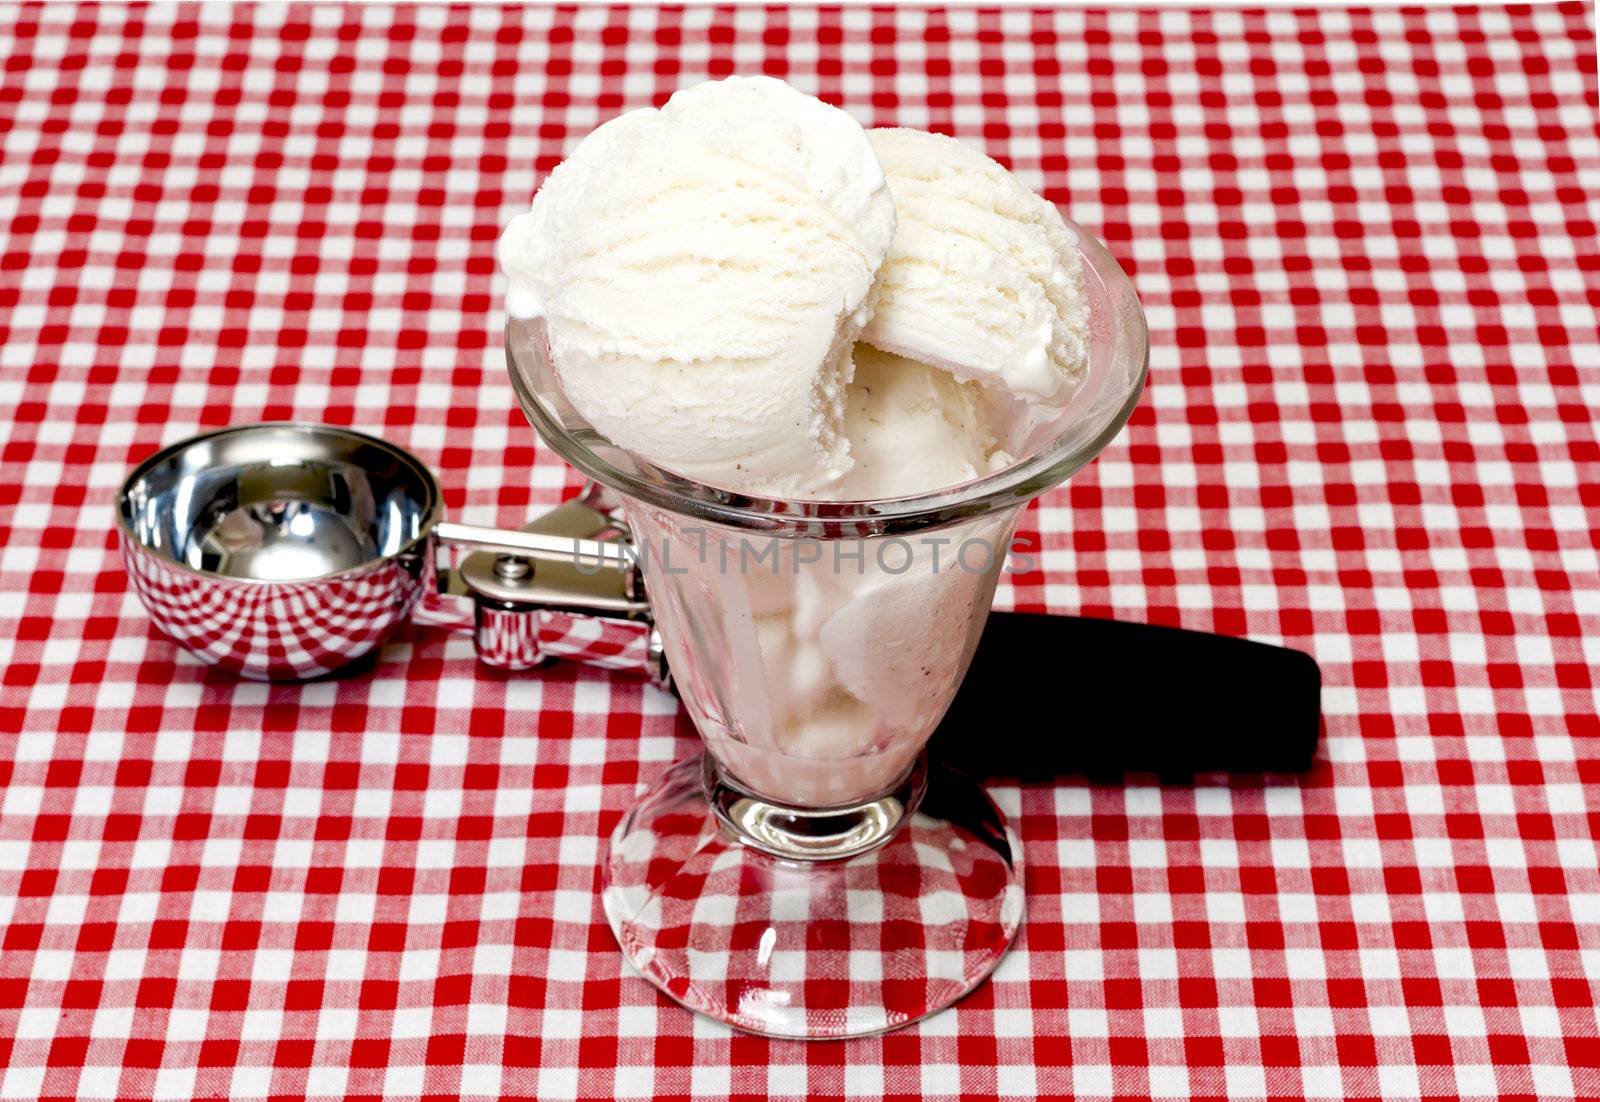 Vanilla ice cream and scoop on table with red gingham table cloth.